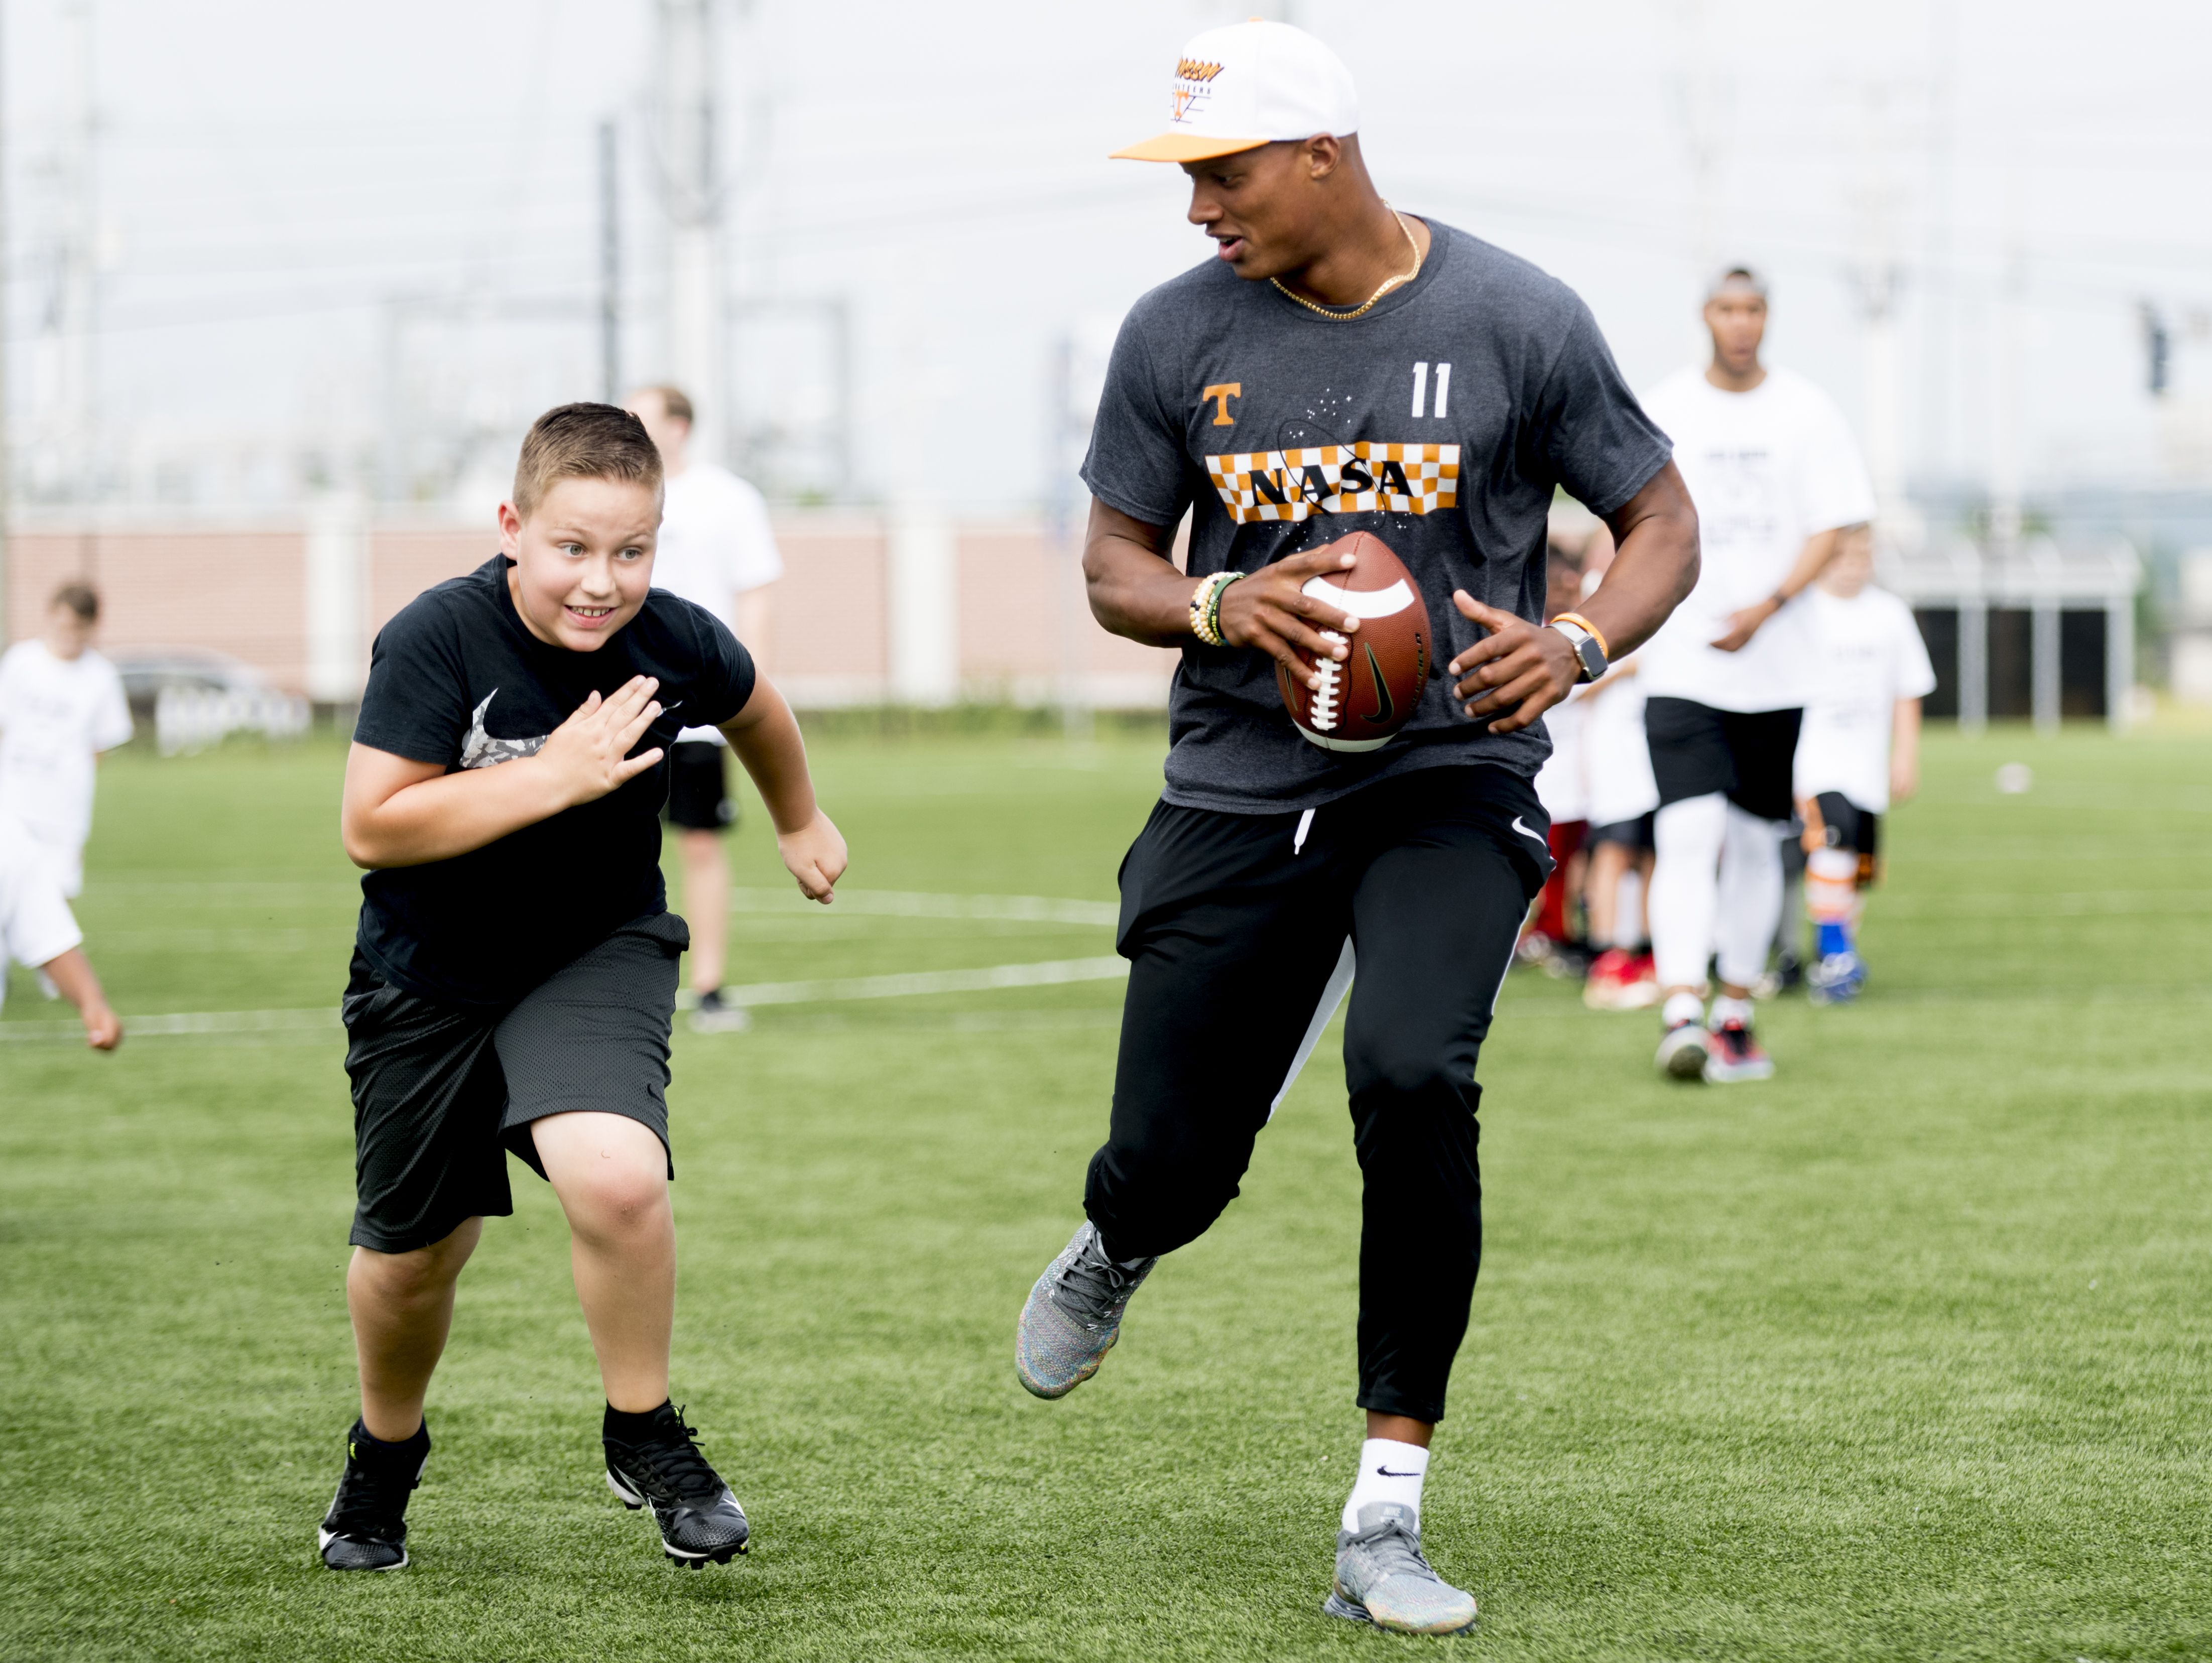 Why former Tennessee Vol Josh Dobbs loves coming back to Knoxville, serving the community | USA